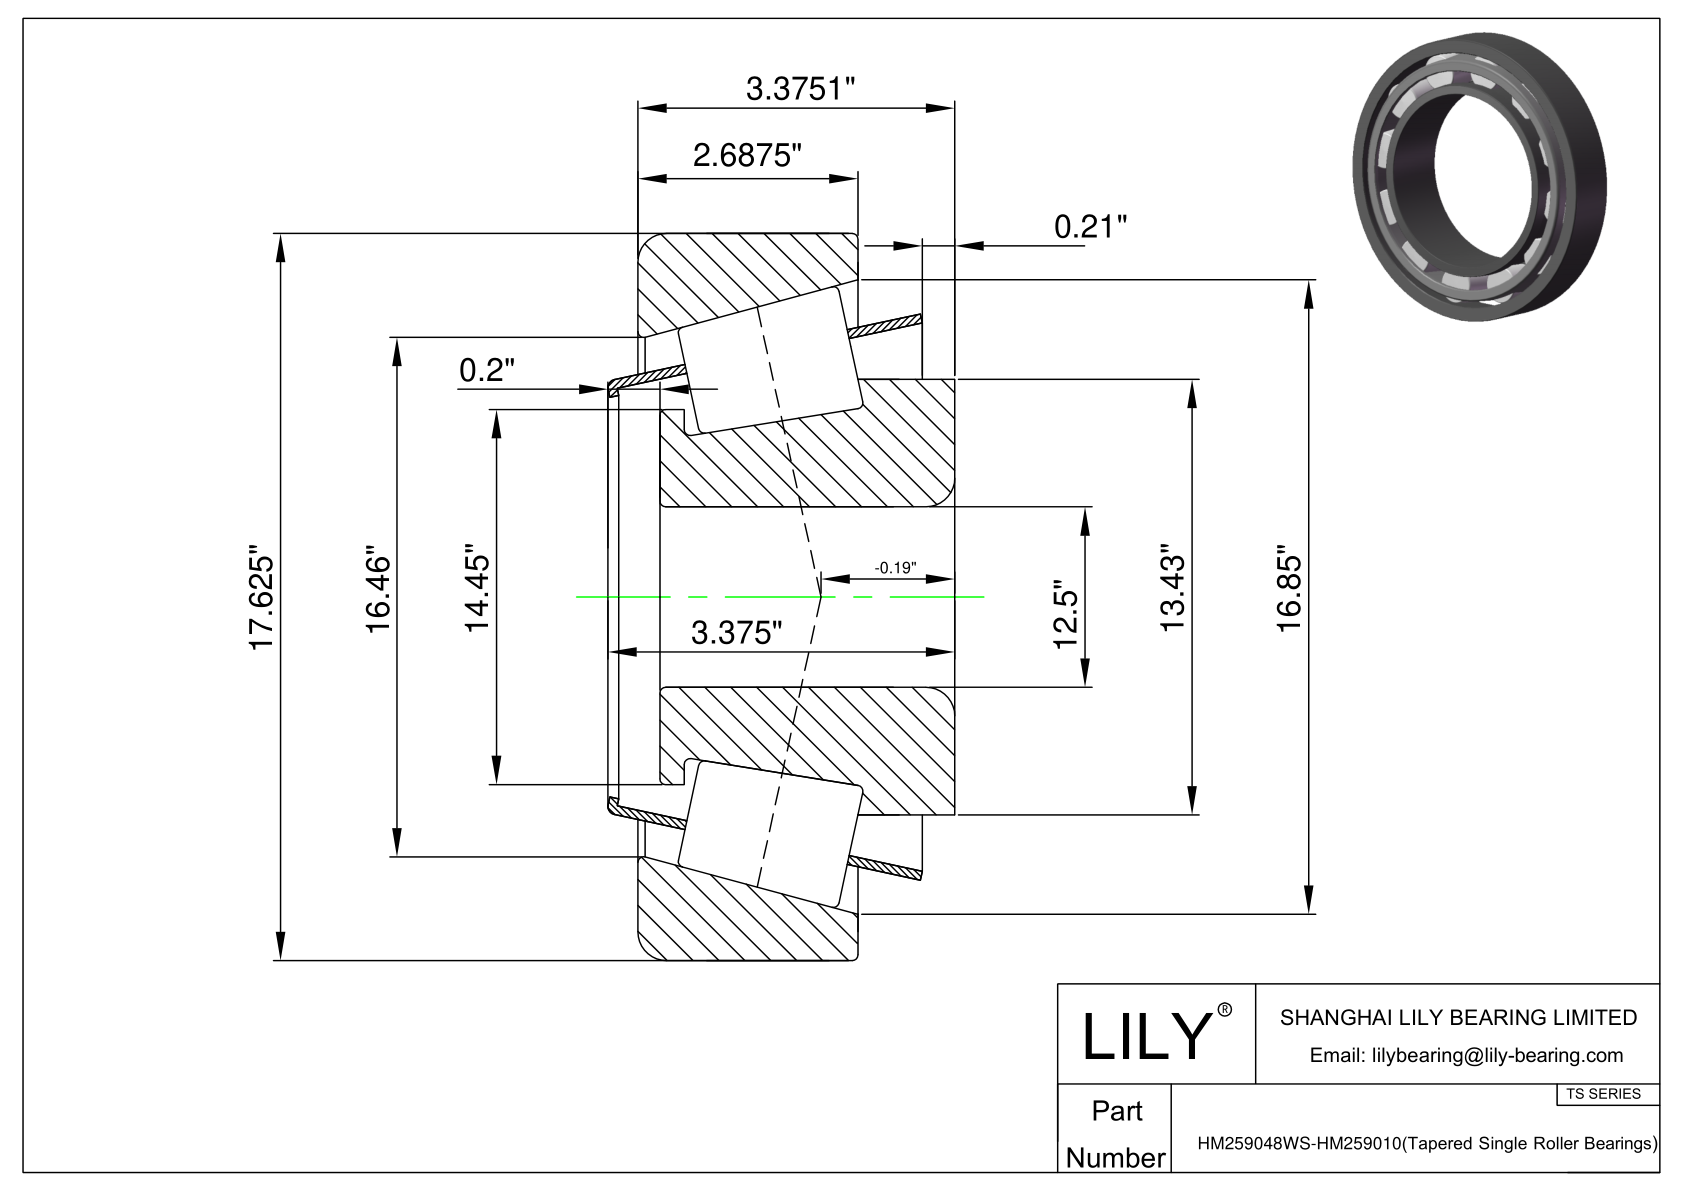 HM259048WS-HM259010 TS (Tapered Single Roller Bearings) (Imperial) cad drawing